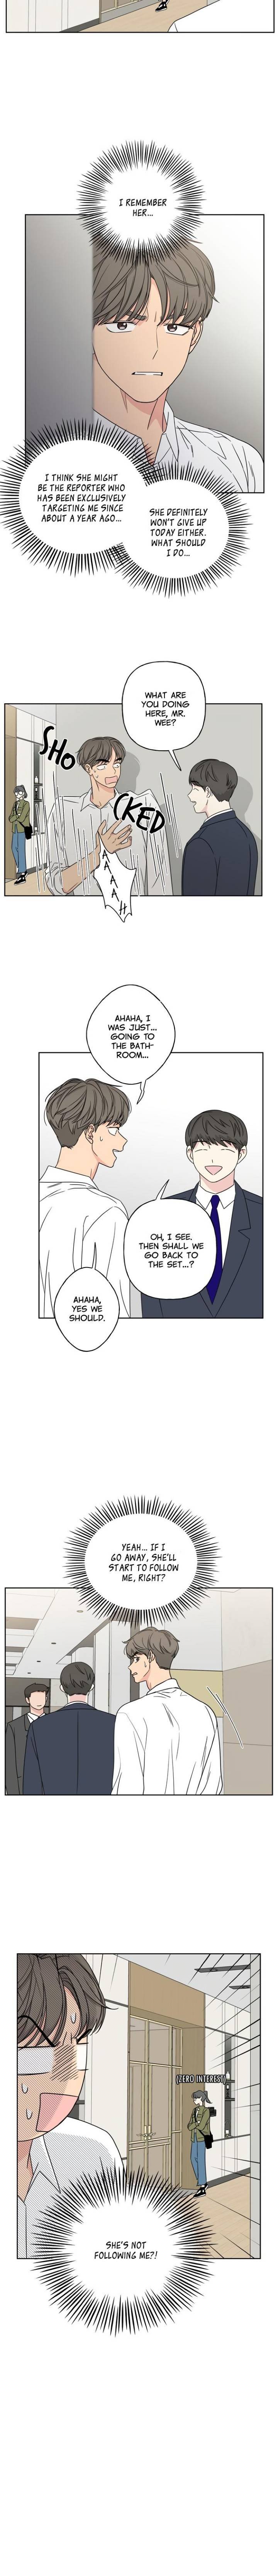 mother-im-sorry-chap-24-2